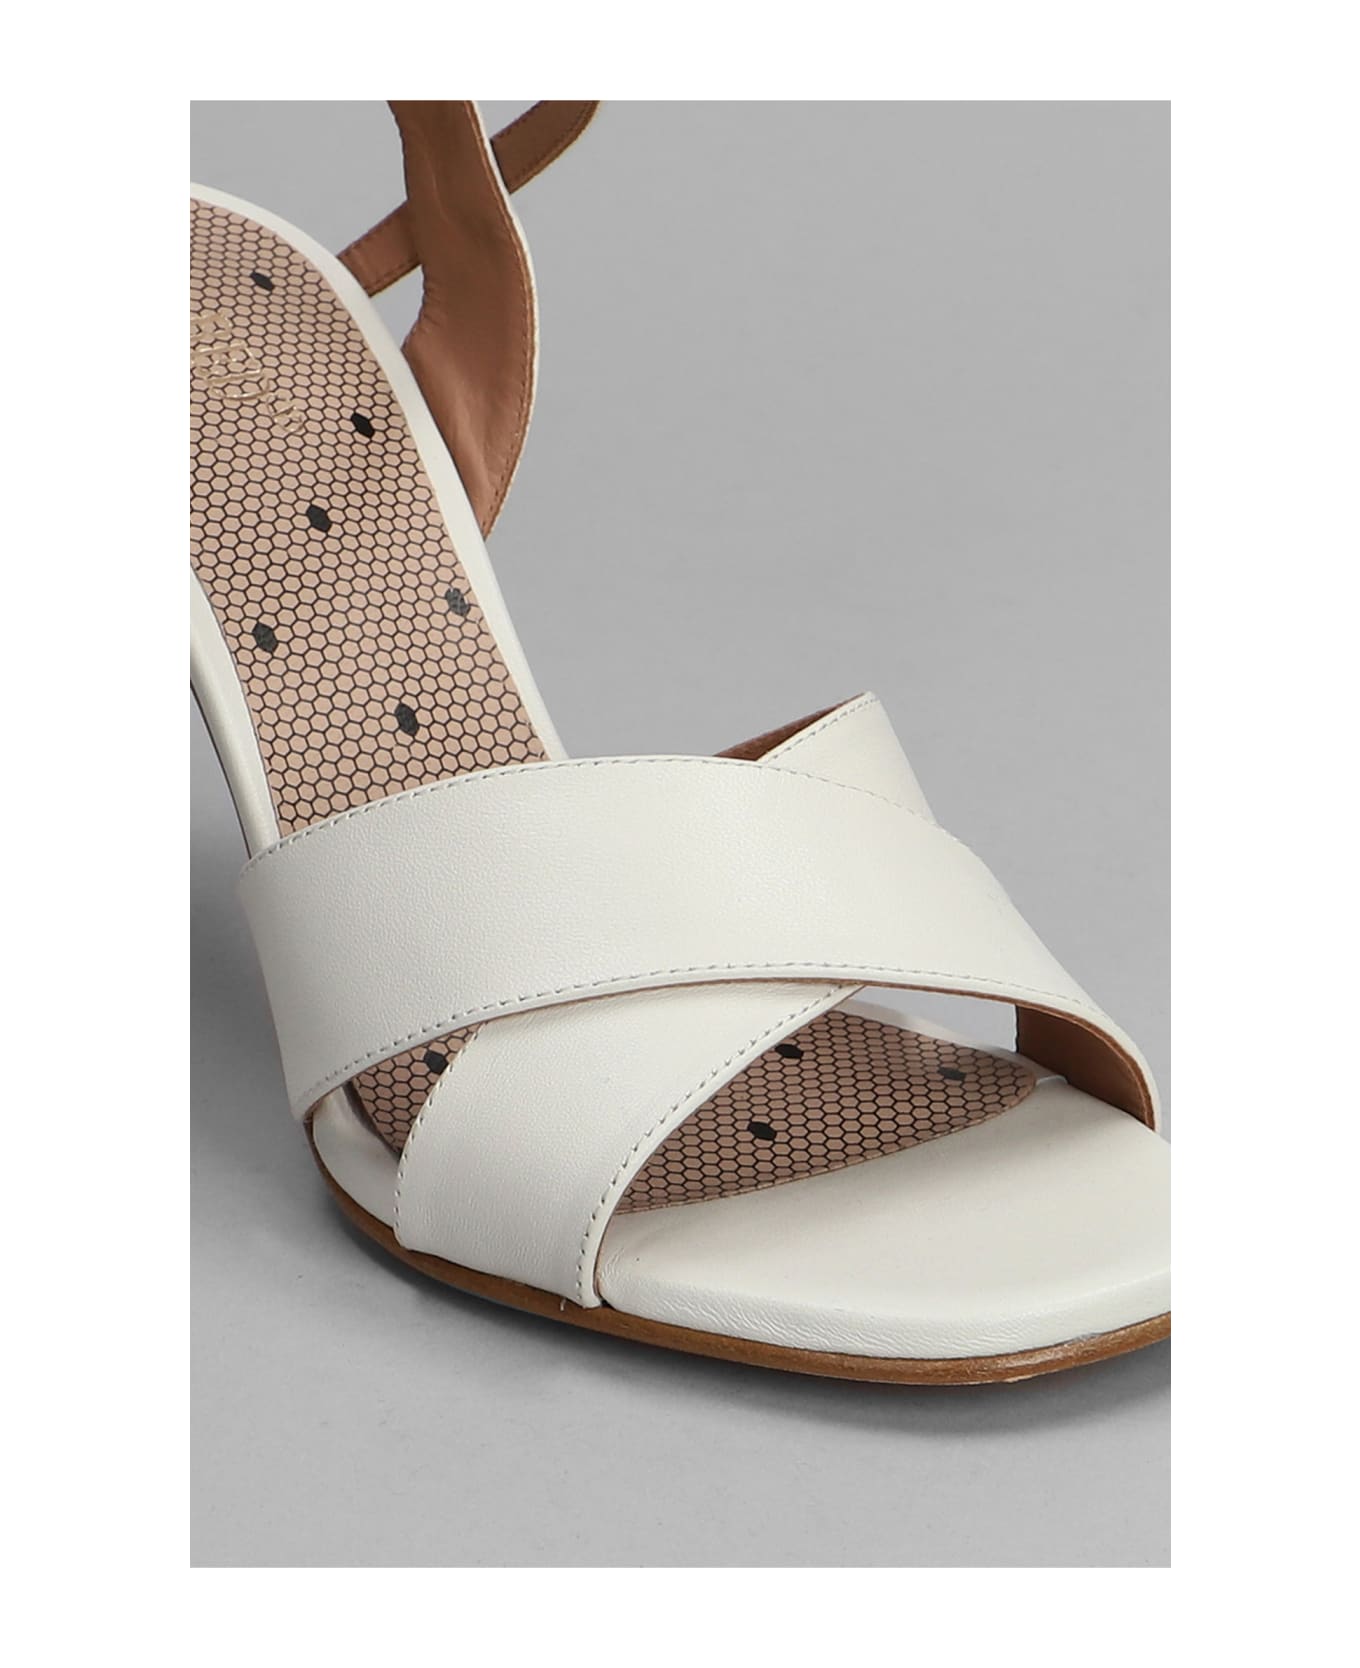 RED Valentino Sandals In White Leather - white